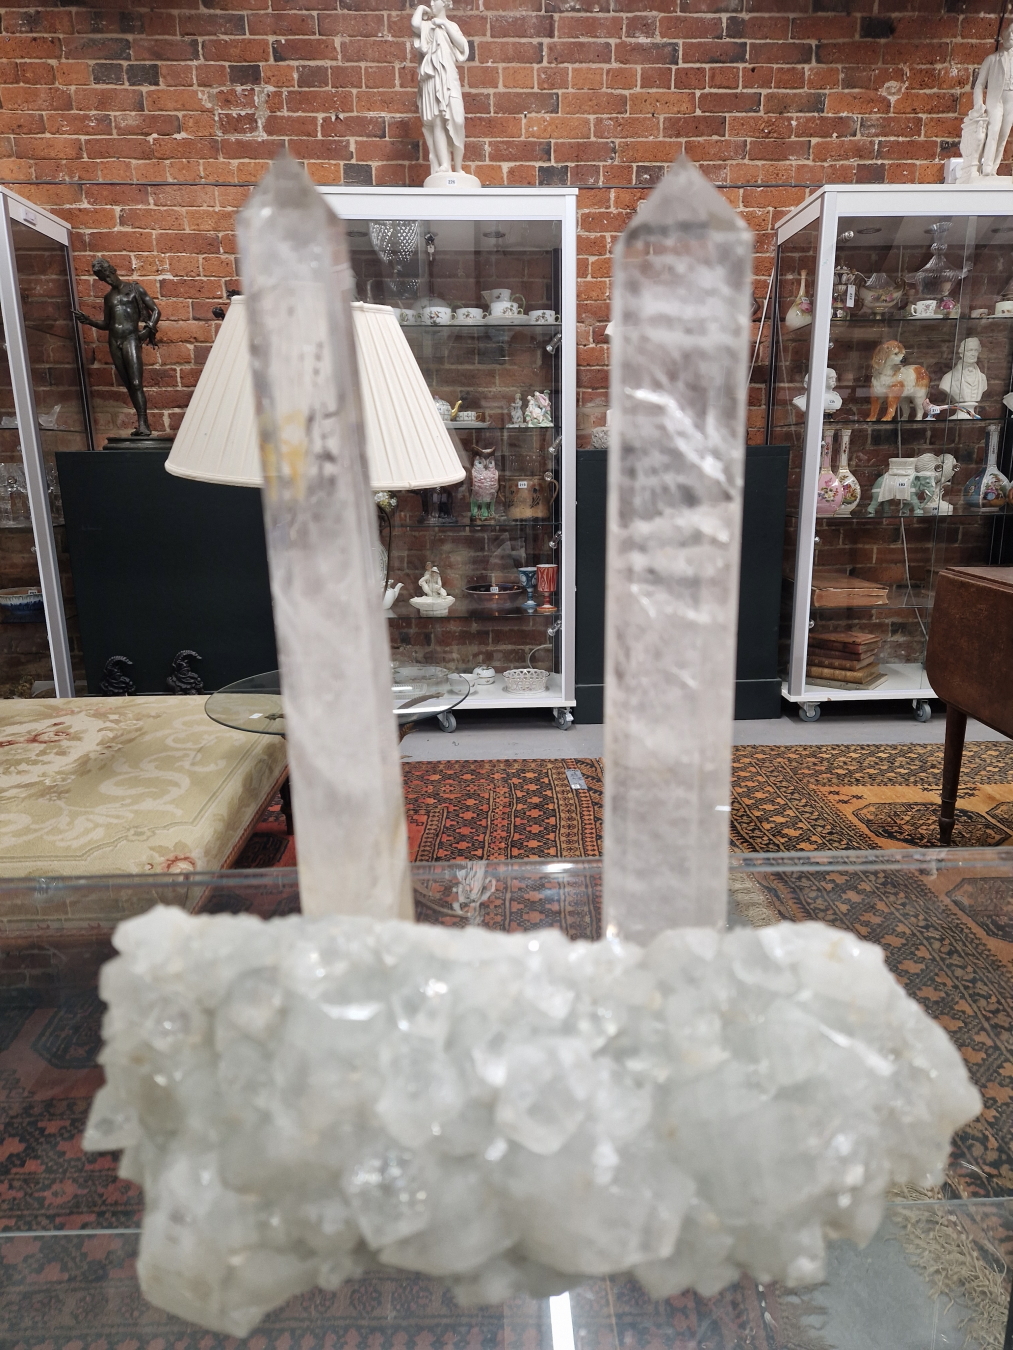 A PAIR OF CUT ROCK CRYSTAL OBELISK TOGETHER WITH A NATURAL CRYSTAL FORMATION